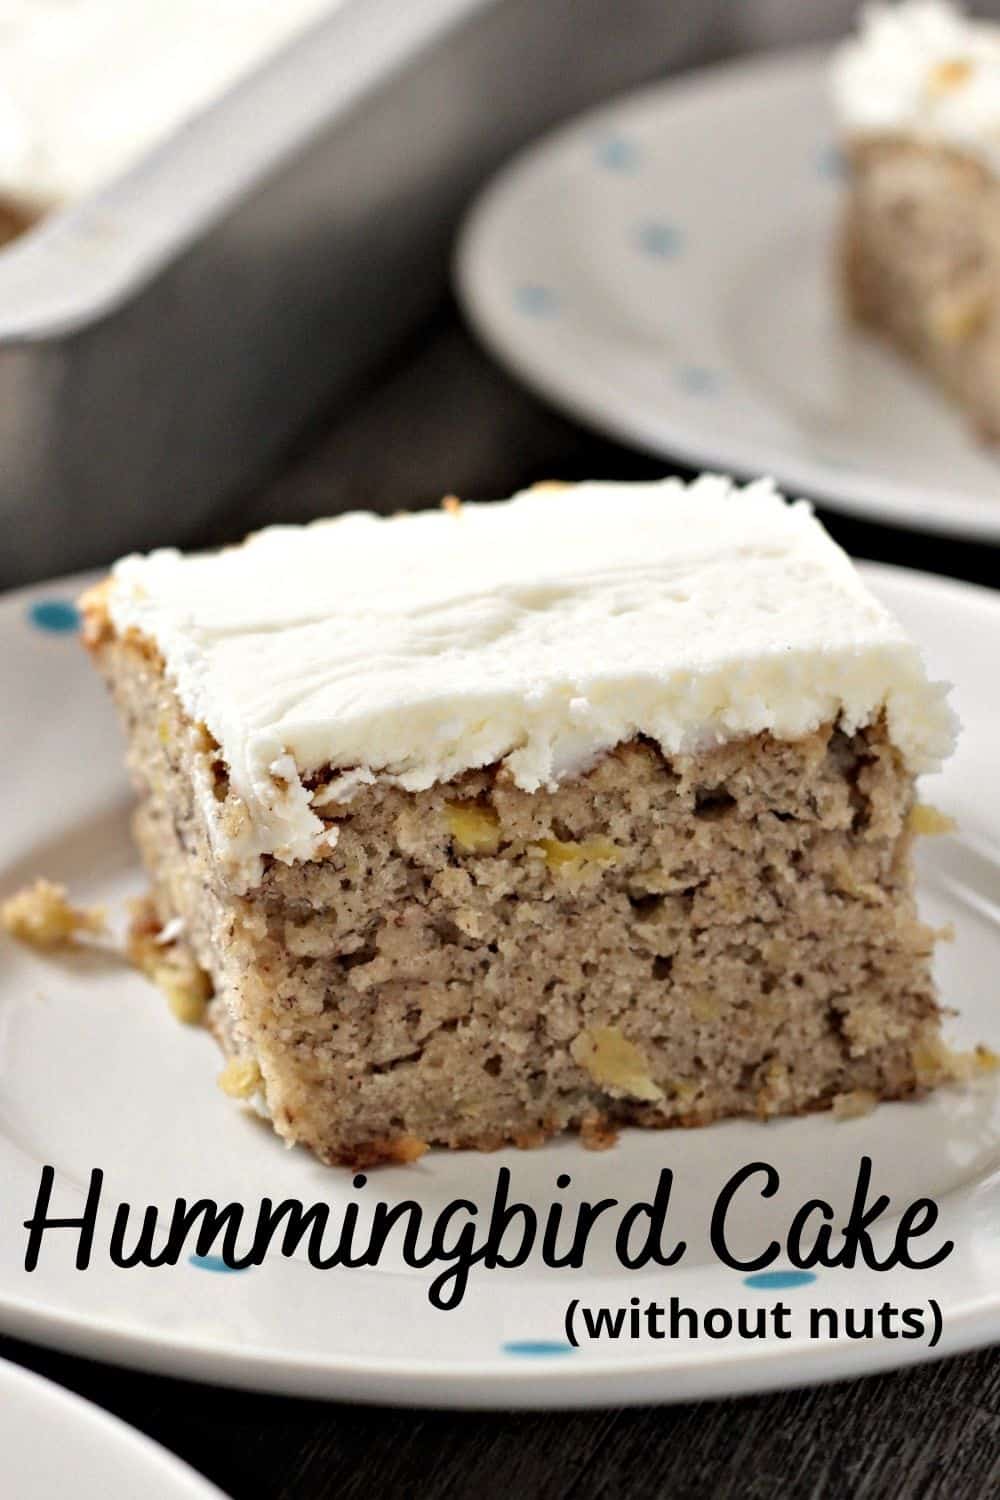 A close up view of a pice of hummingbird cake with the title at the bottom.